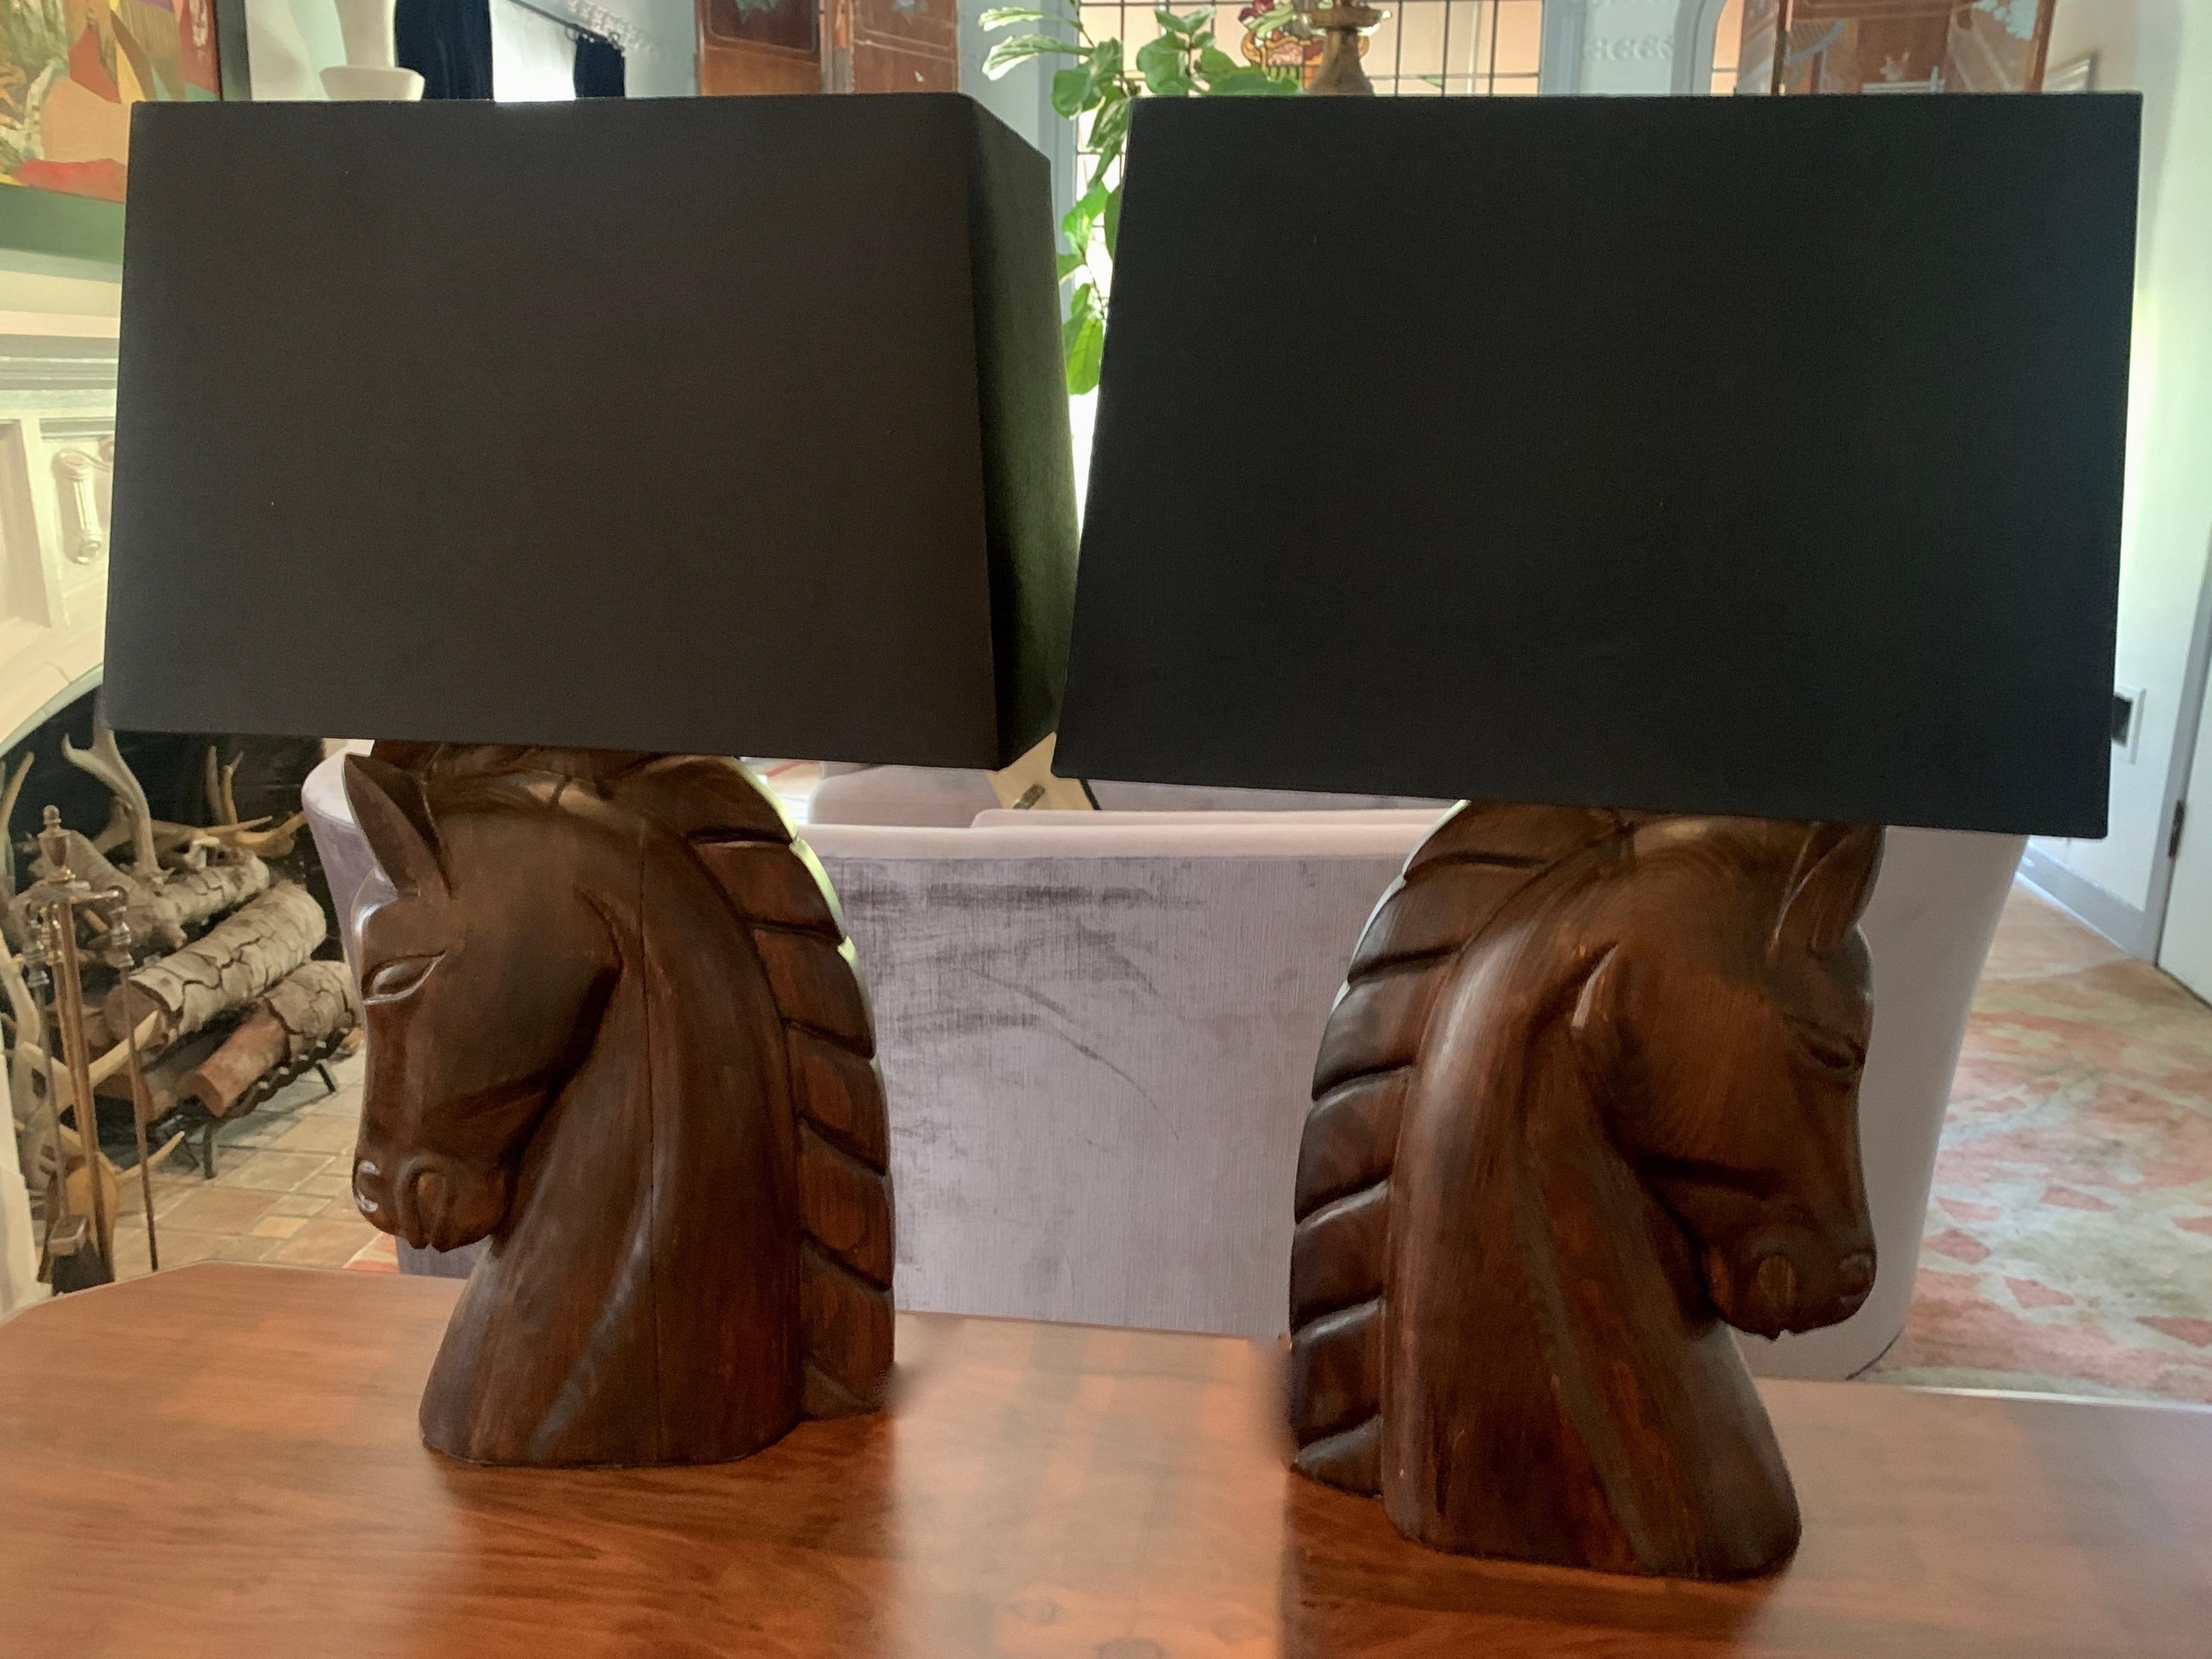 Wood William Haines Carved Horse Lamps with Shades